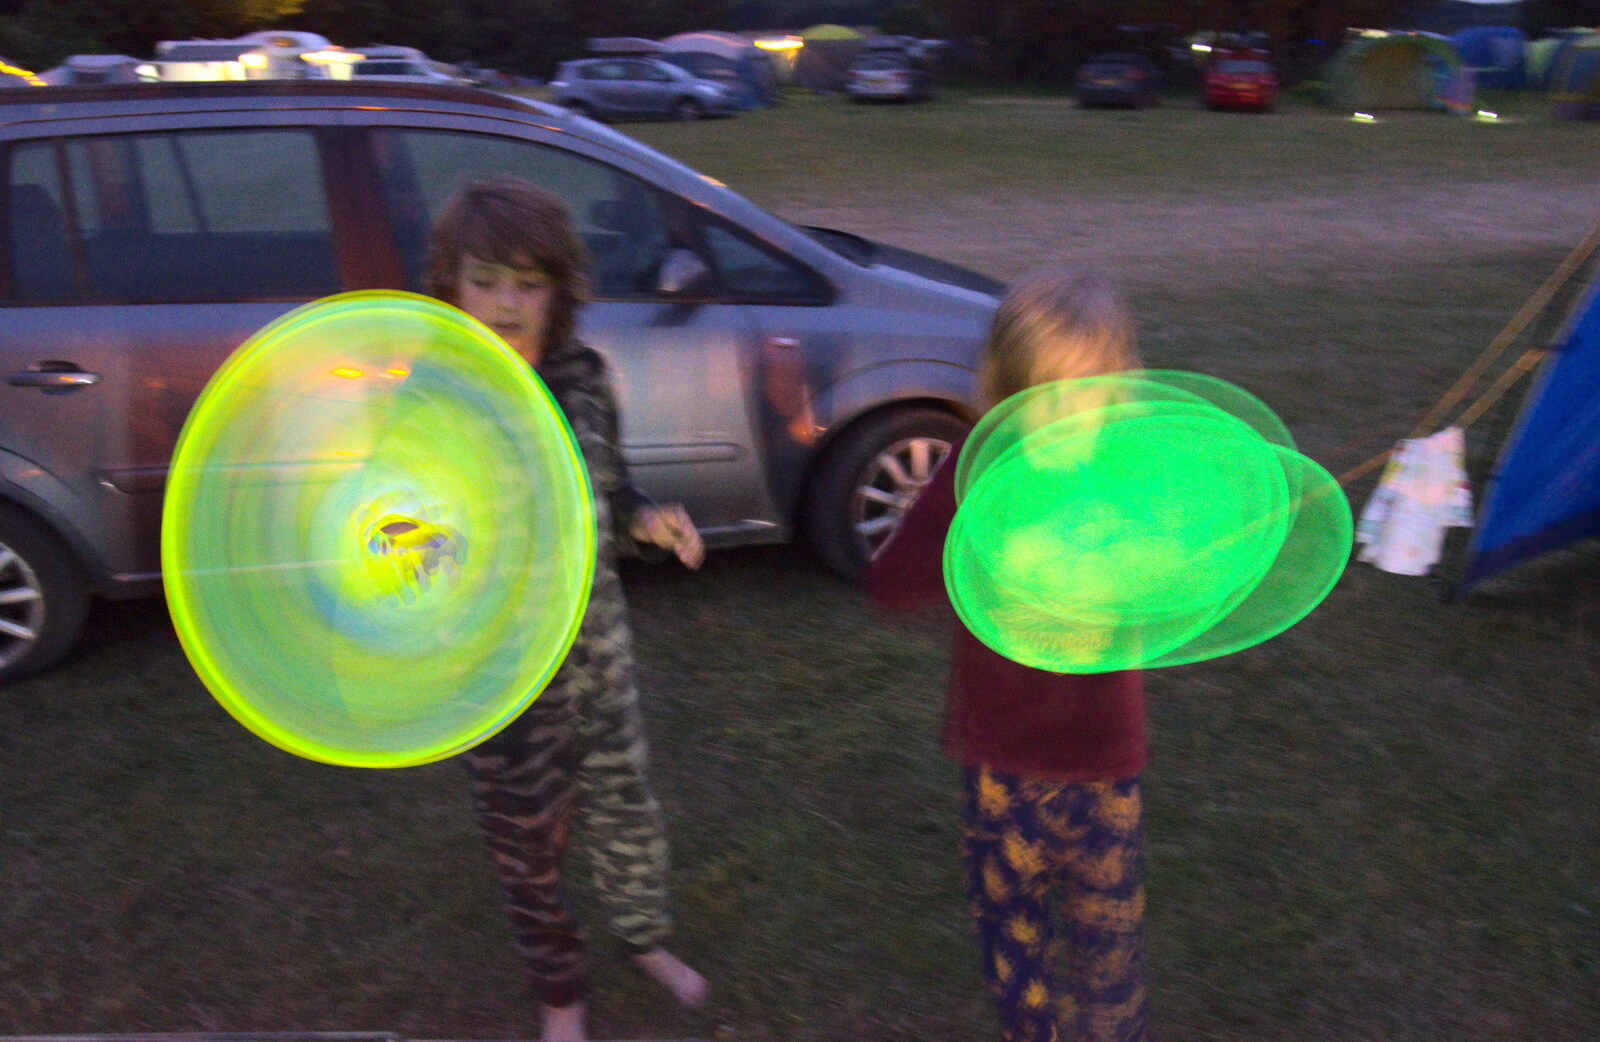 Fred and Harry do glow sticks in the dark from Camping on the Coast, East Runton, North Norfolk - 25th July 2020